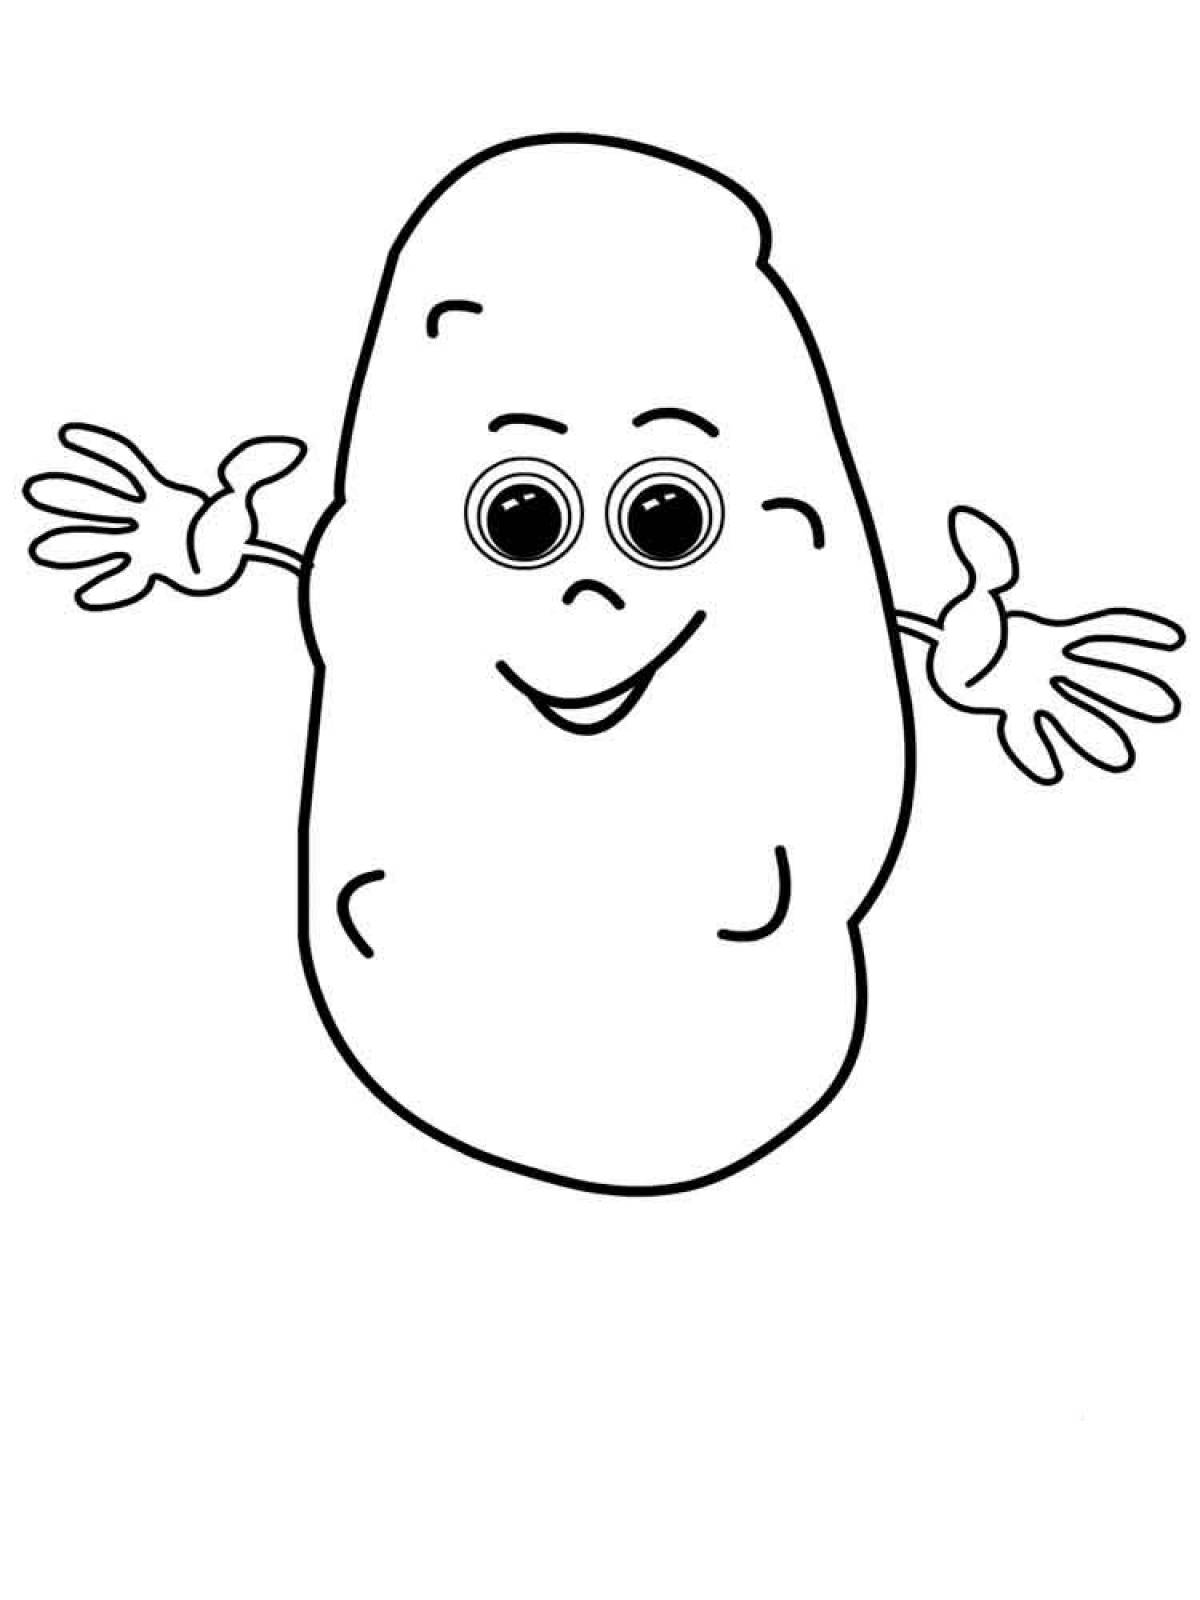 Potato with hands